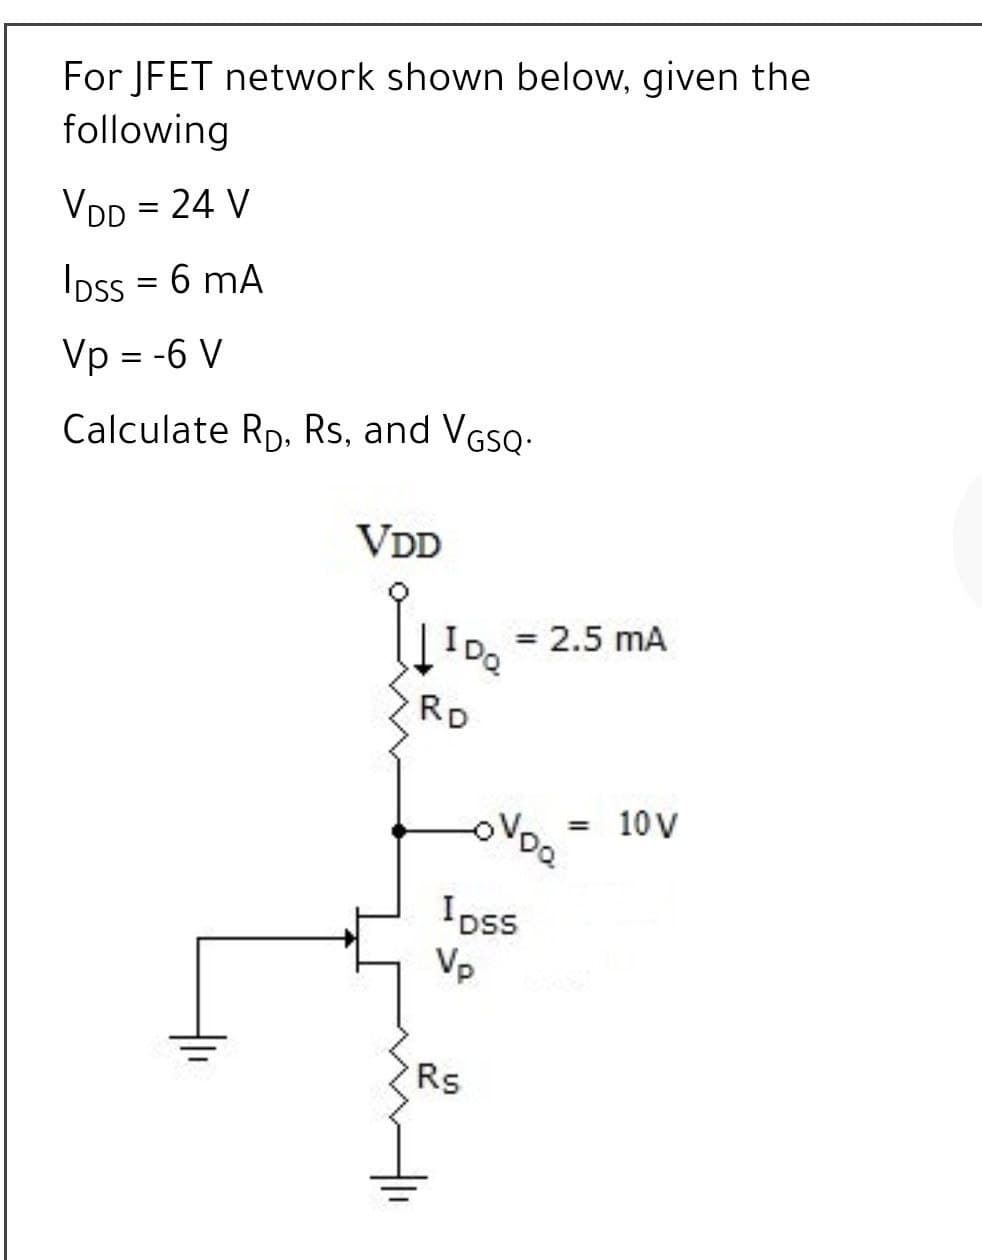 ID. = 2.5 mA
For JFET network shown below, given the
following
VDD = 24 V
Ioss = 6 mA
Vp = -6 V
Calculate Rp, Rs, and VGSQ:
VDD
|IDQ
RD
10 V
Ipss
Vp
Rs
두
